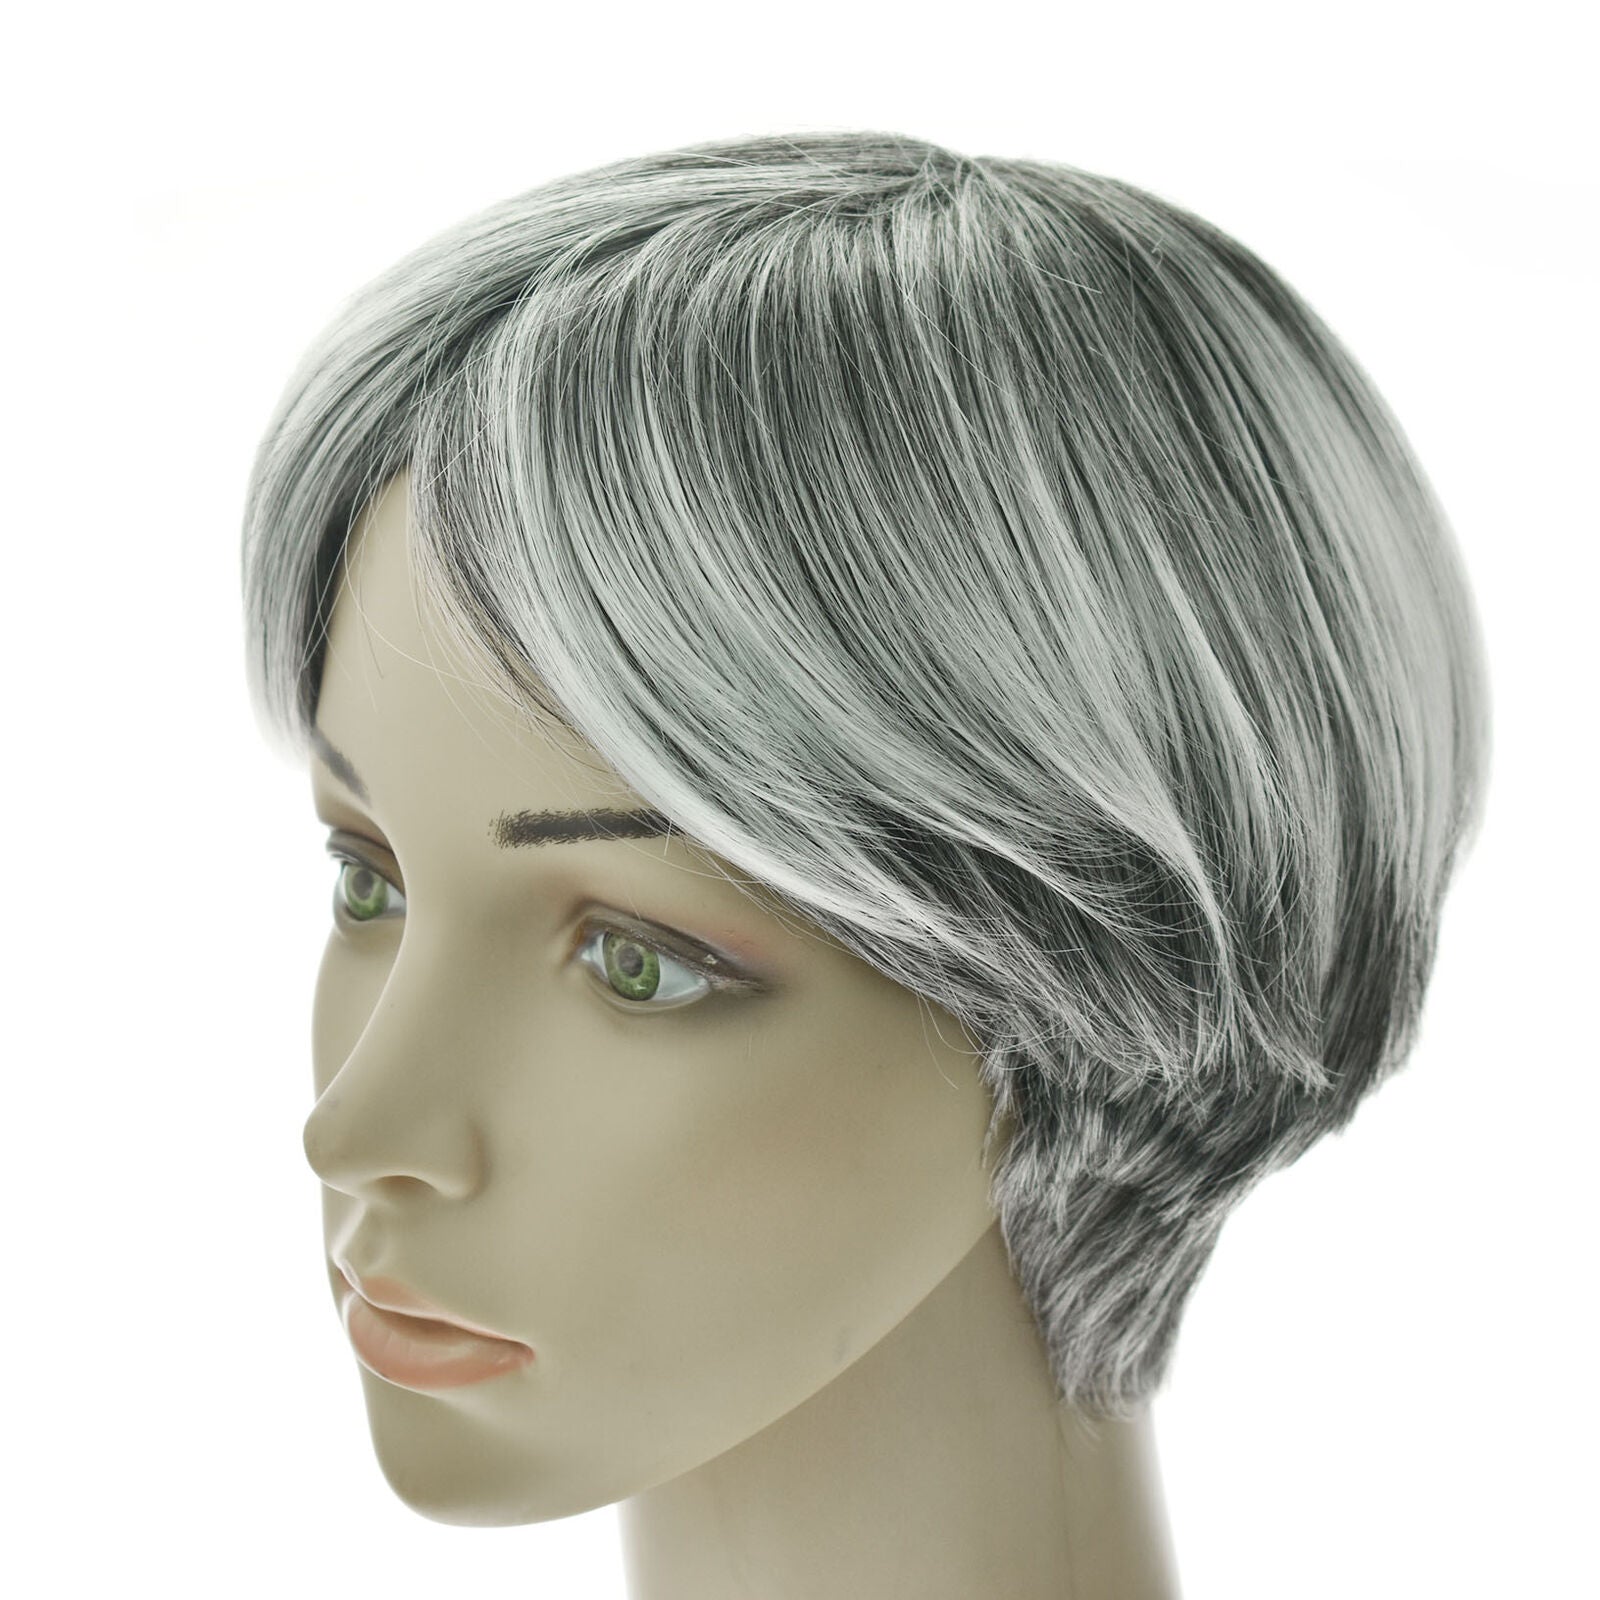 Ladies Wig Natural Short Light Gray Straight Hair Curly Fashion Wig For Human